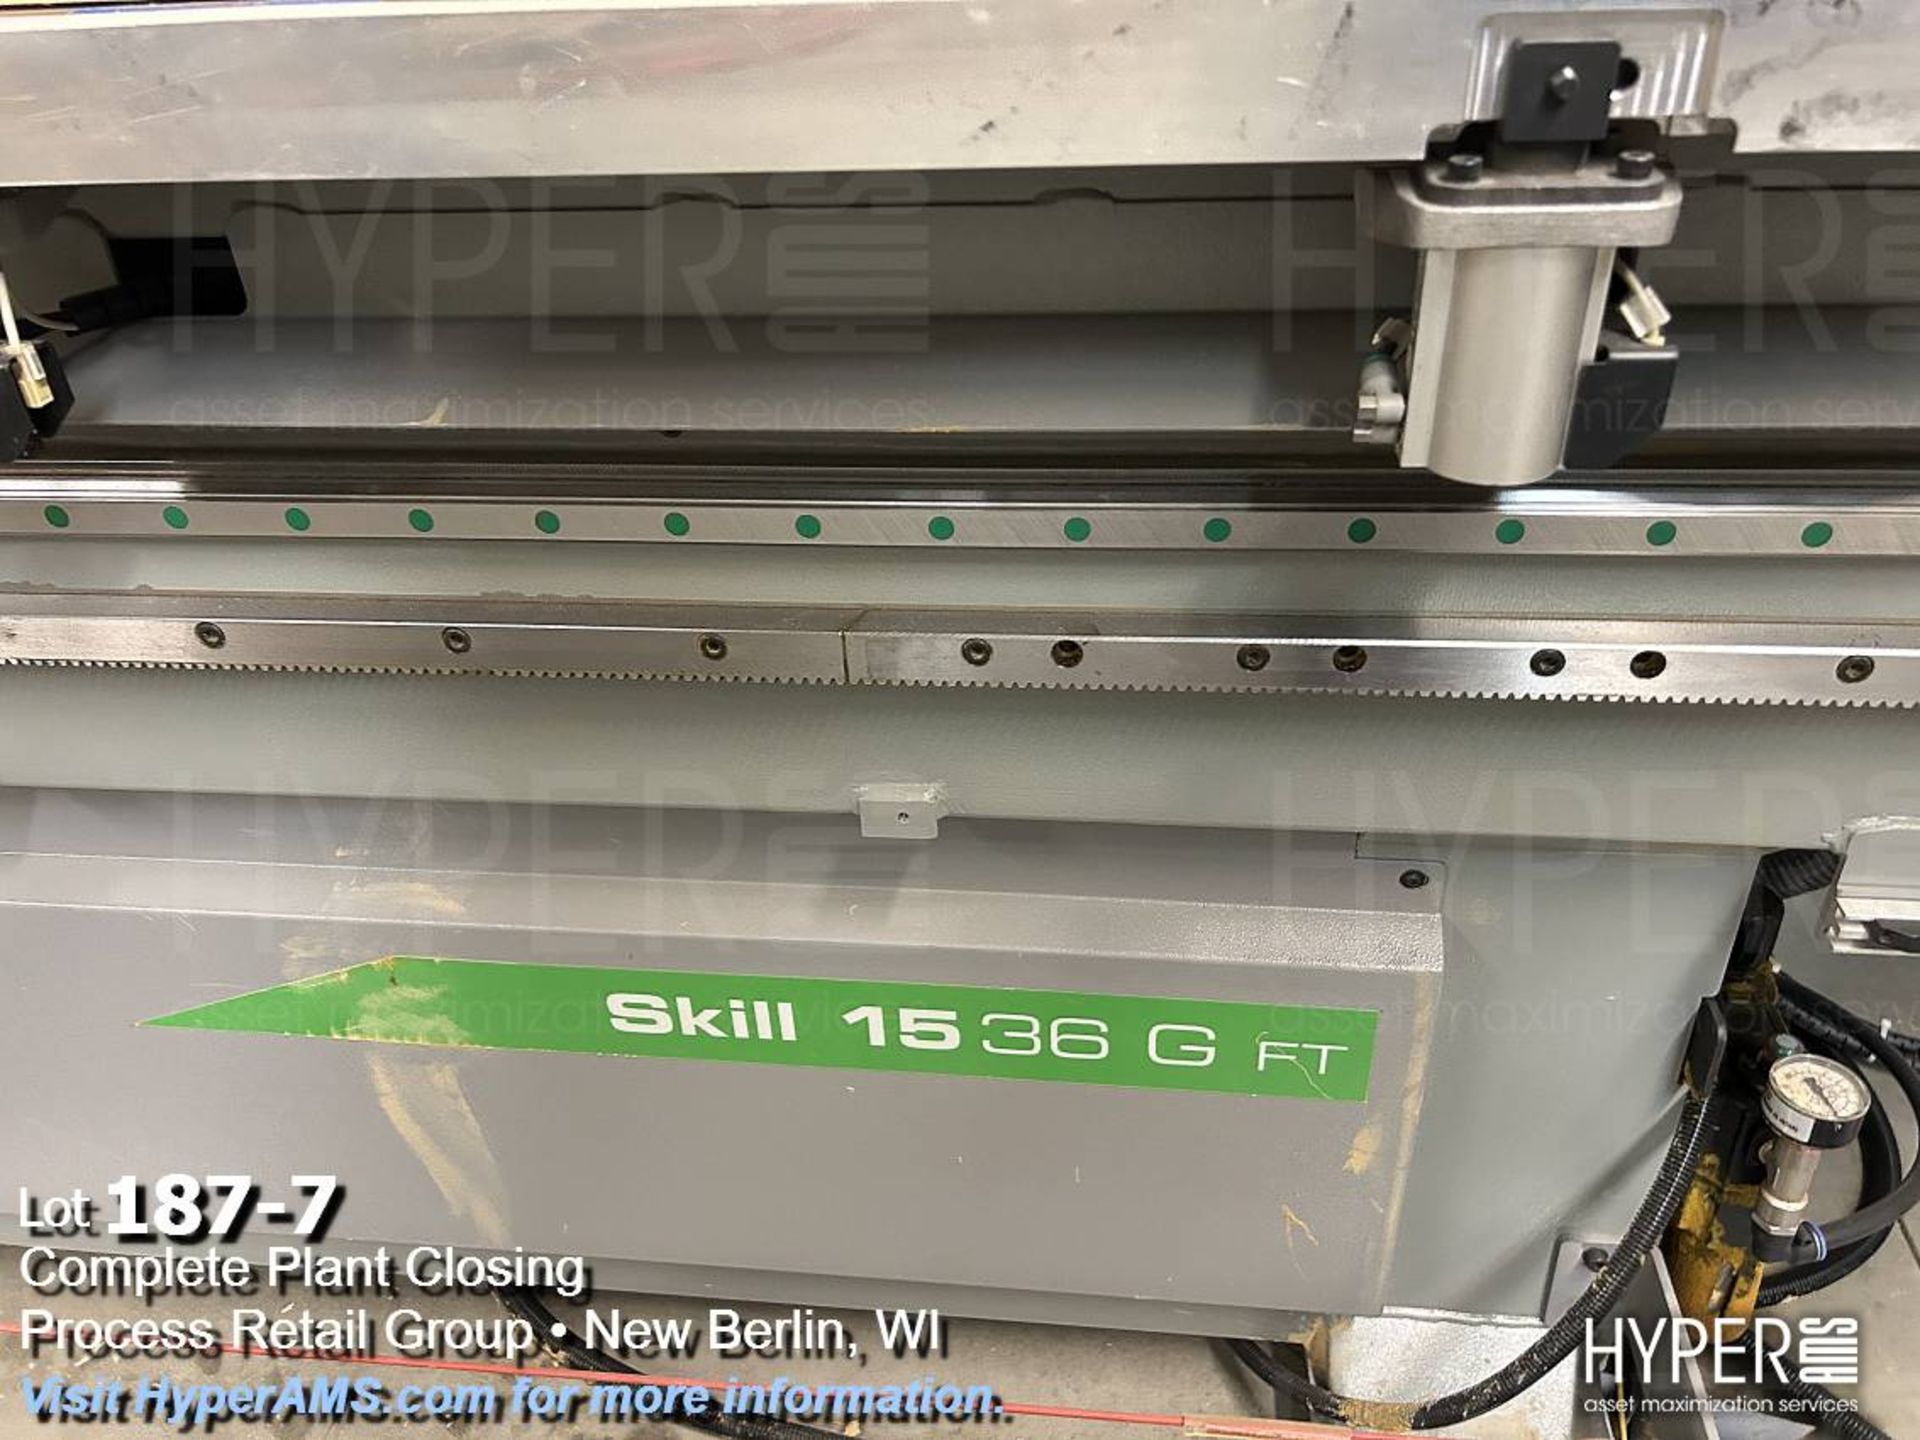 Biesse 1536GFT CNC Router - Image 7 of 23